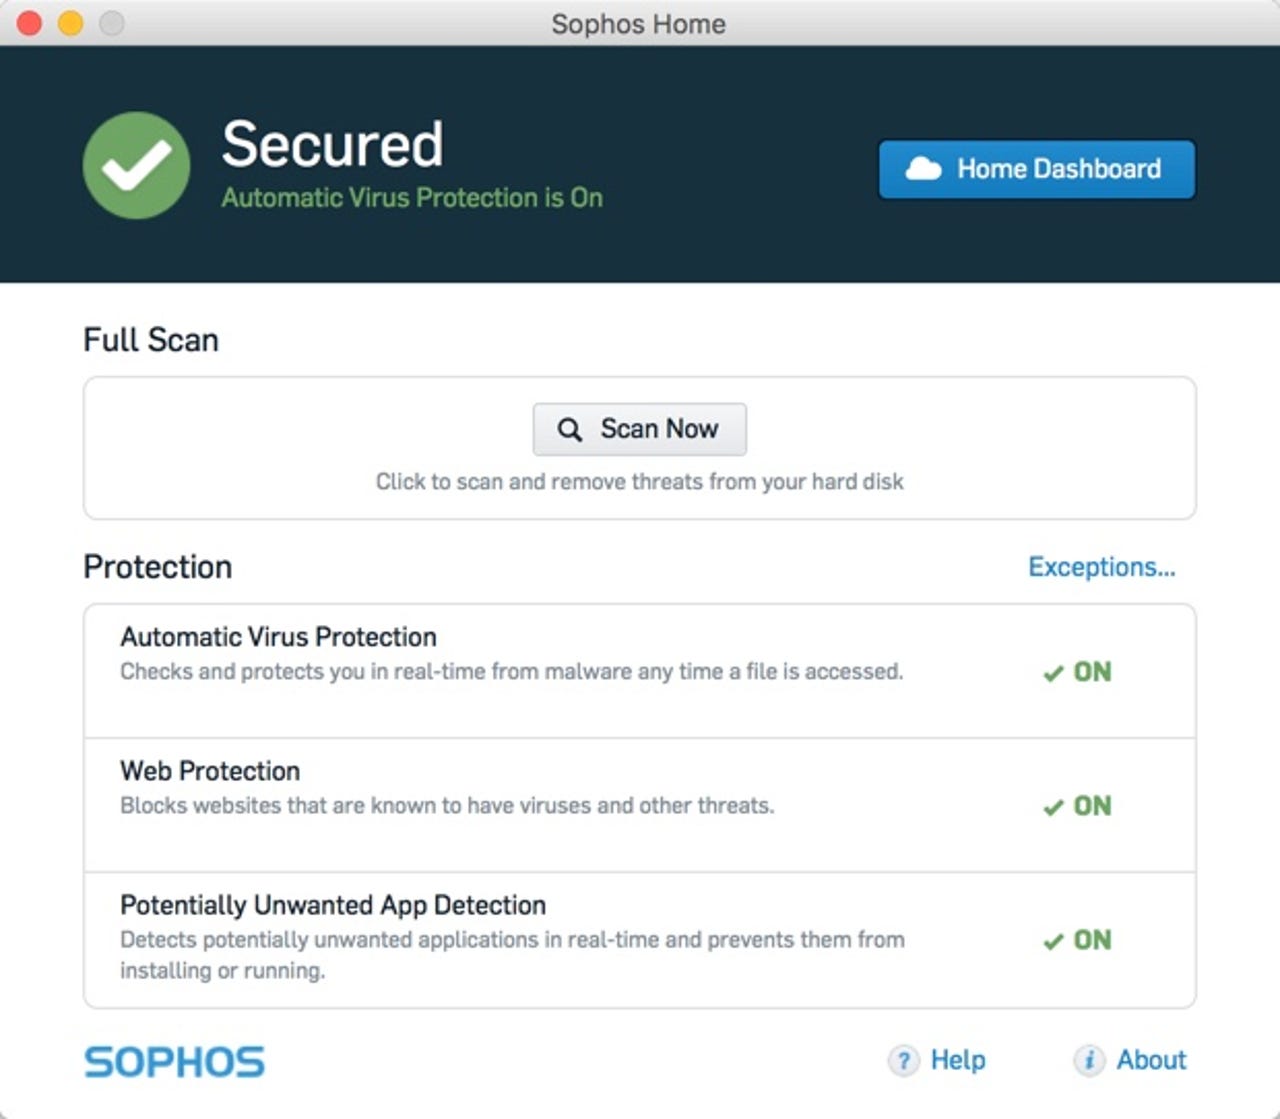 Sophos Home: Free antivirus for Windows and Mac users